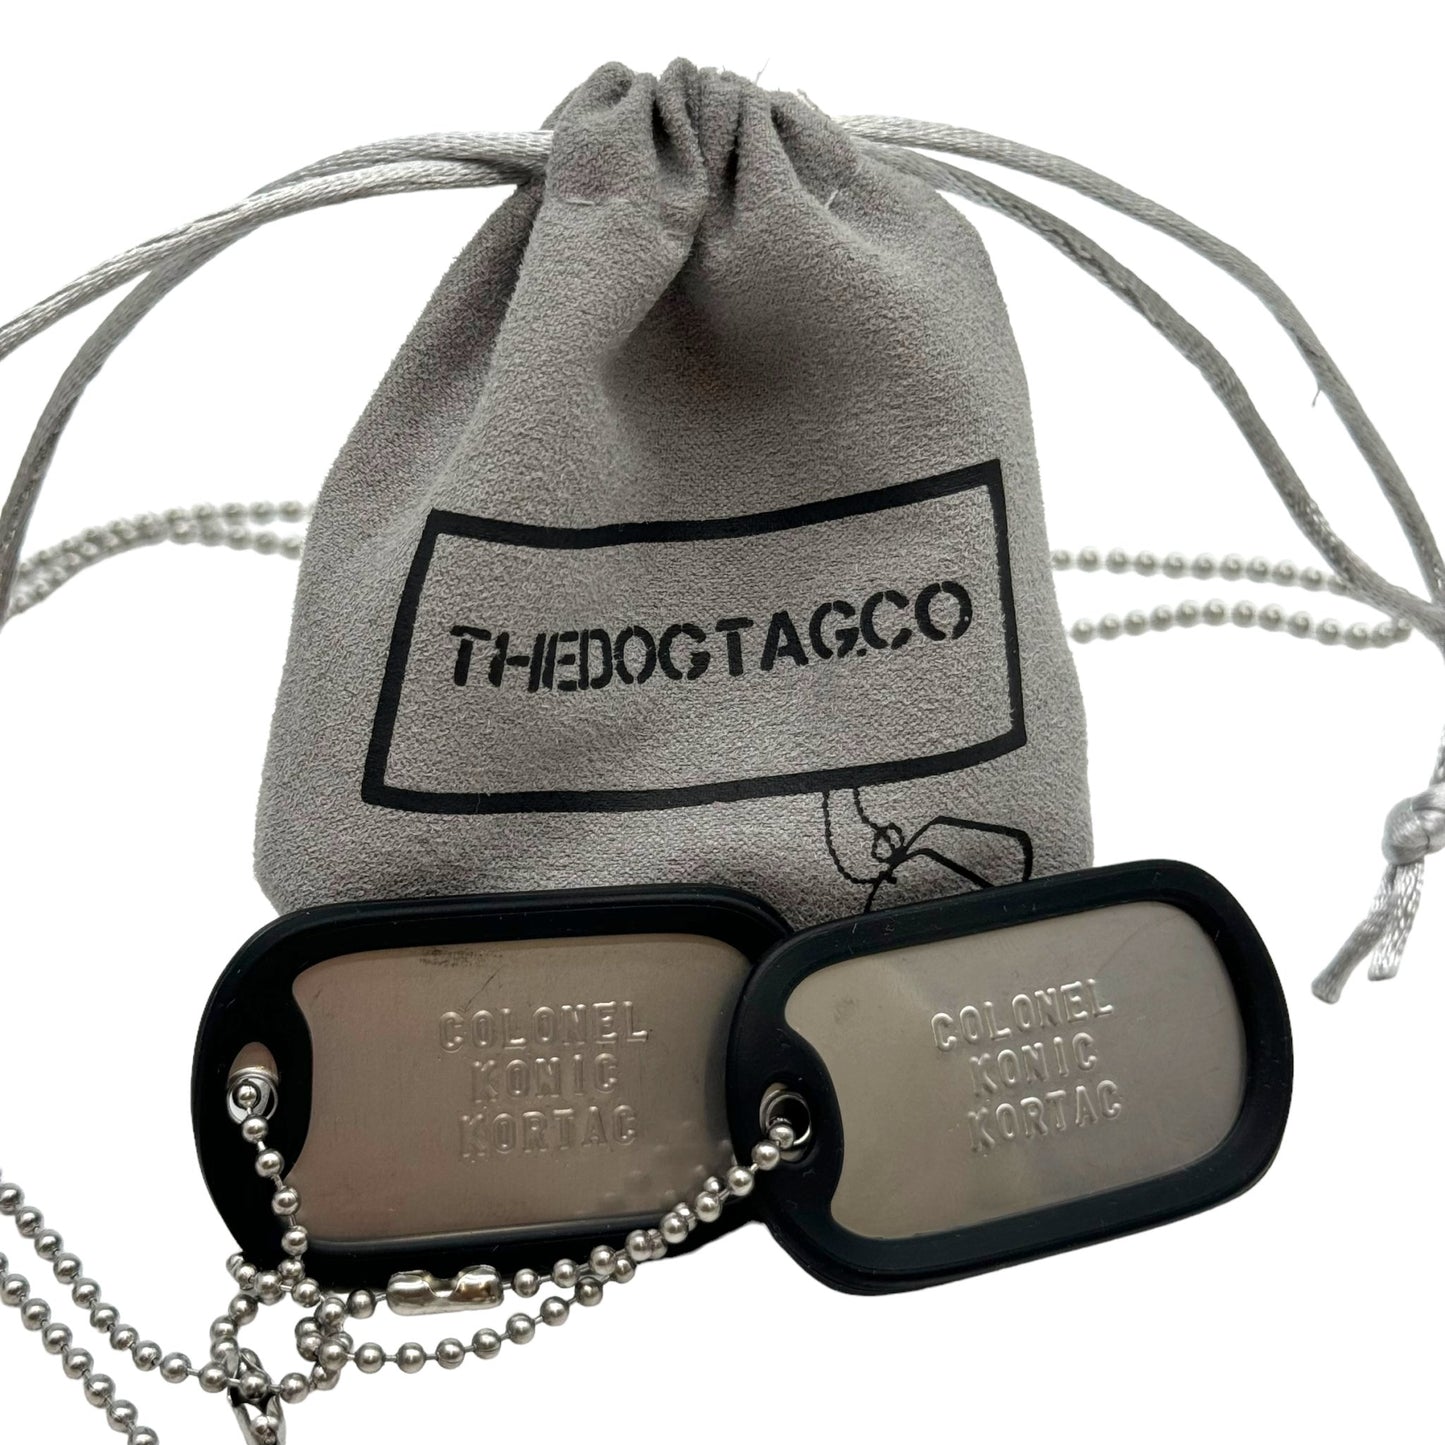 'KONIC KORTAC' Military Dog Tags - Cosplay Costume Prop Replica - Stainless Steel Chains Included - TheDogTagCo